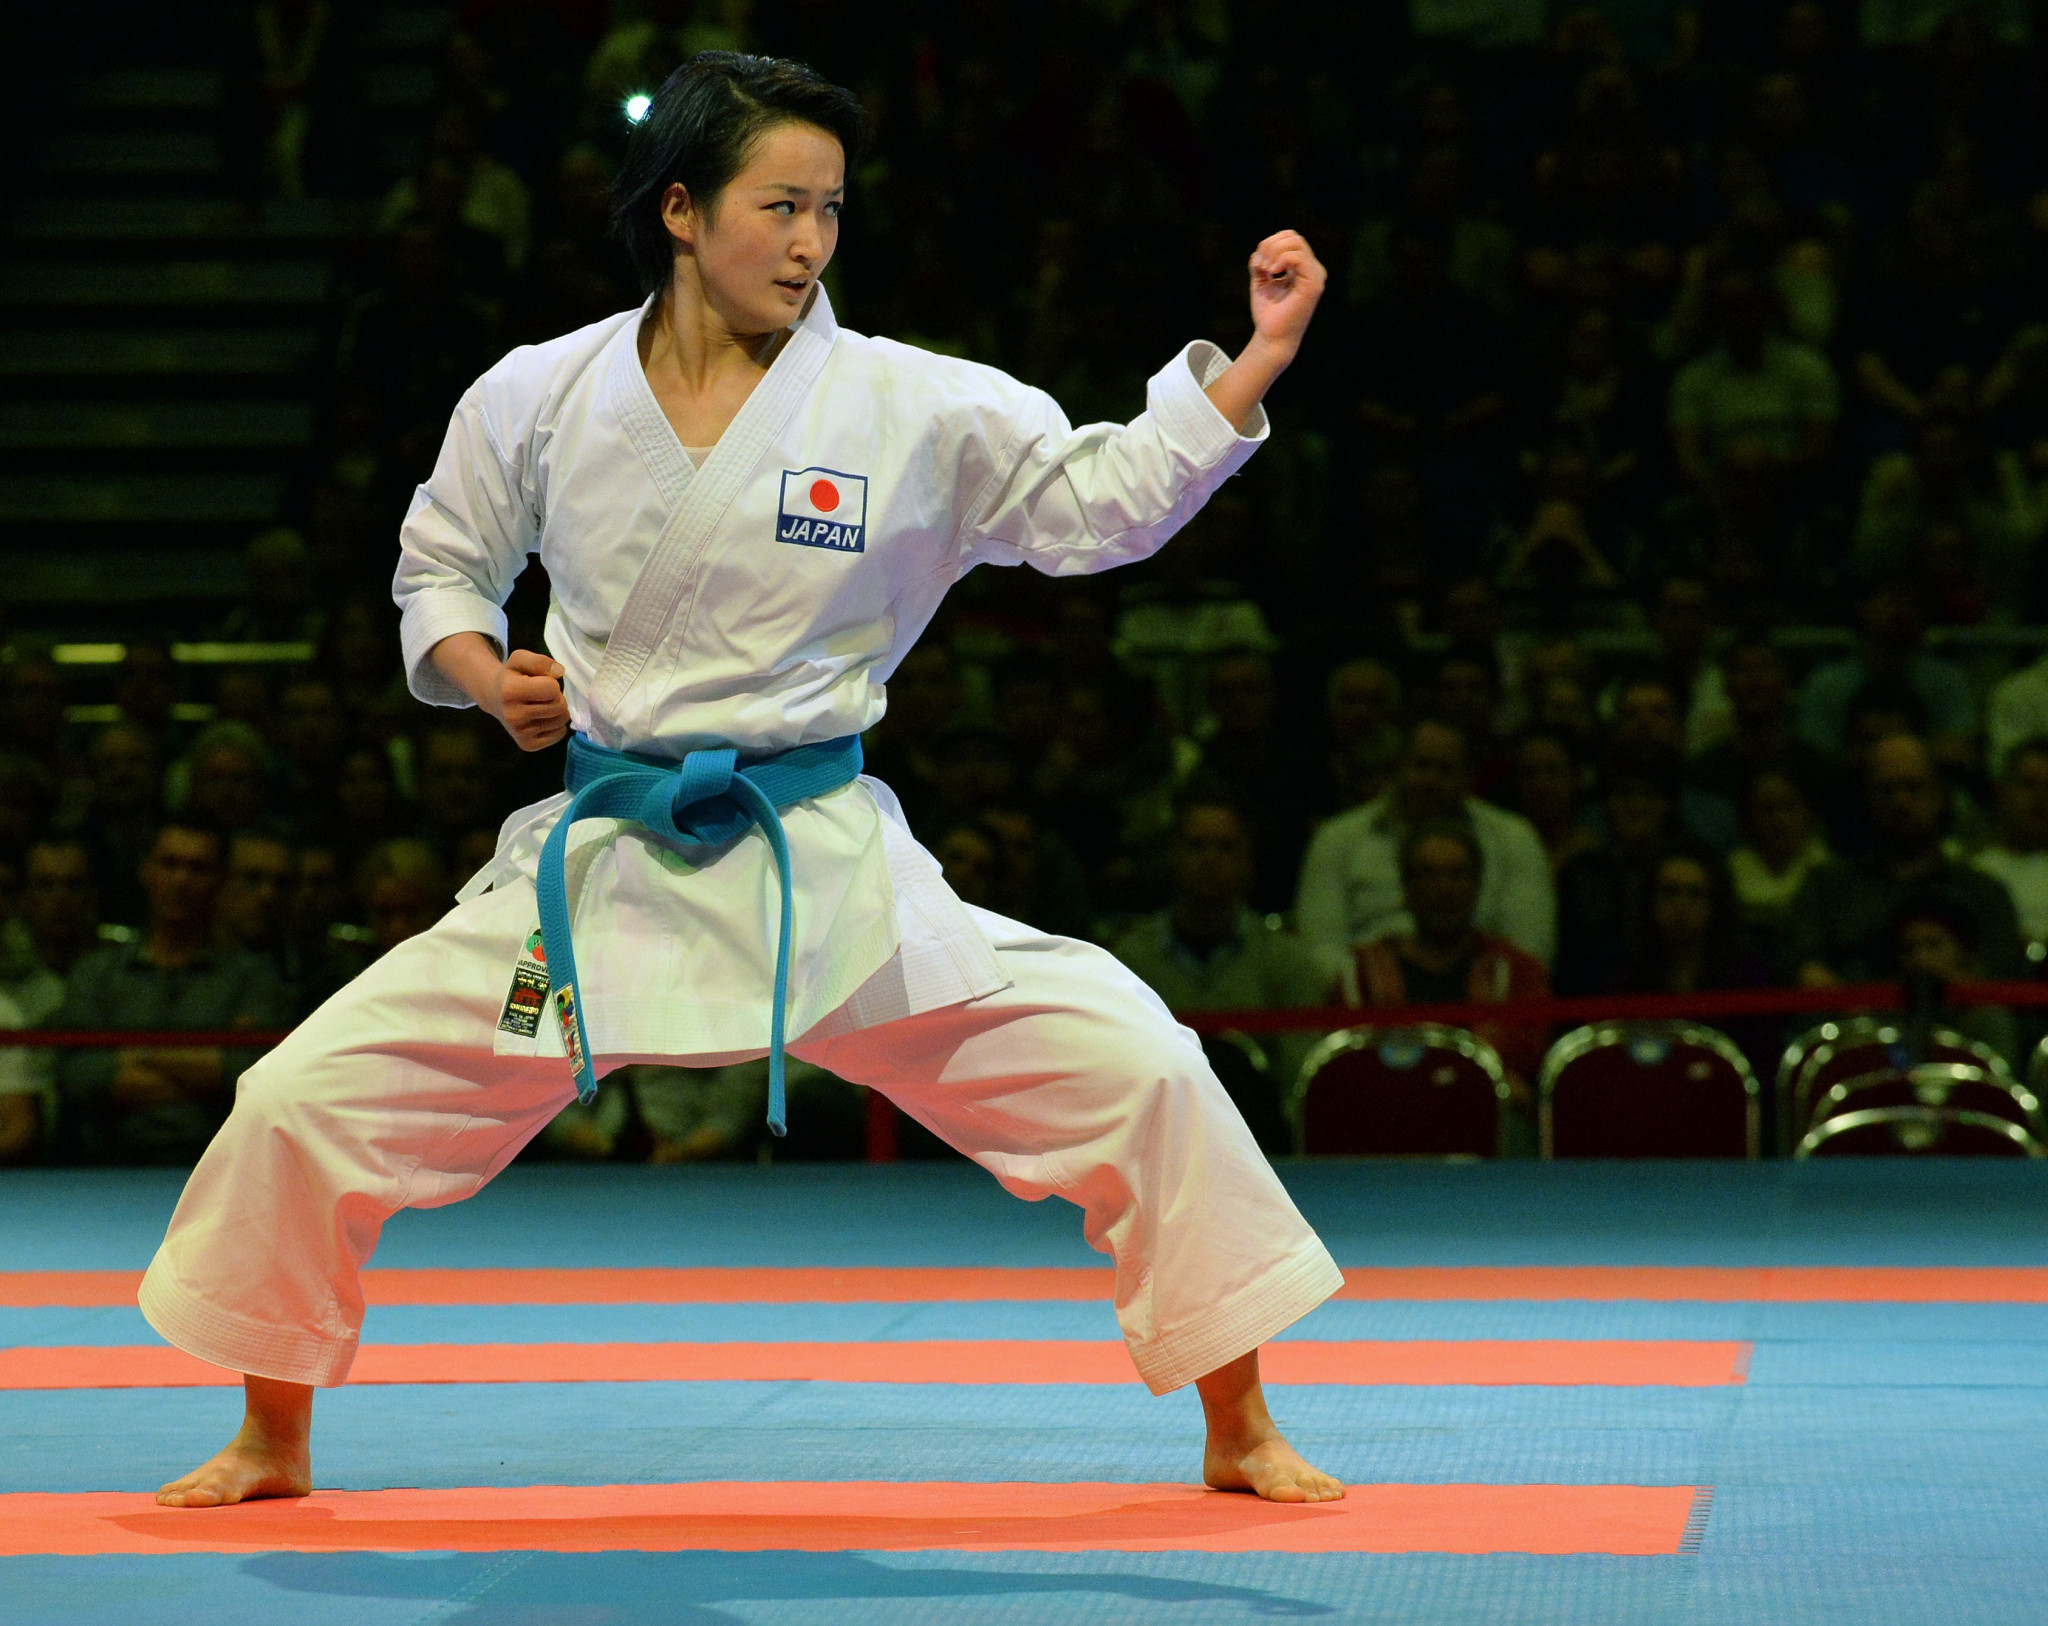 Japan's Kiyou Shimizu en route to winning the kata title at the 2014 World Karate Championships, a discipline an WKF Commission is testing a new system to evaluate competition ©Getty Images